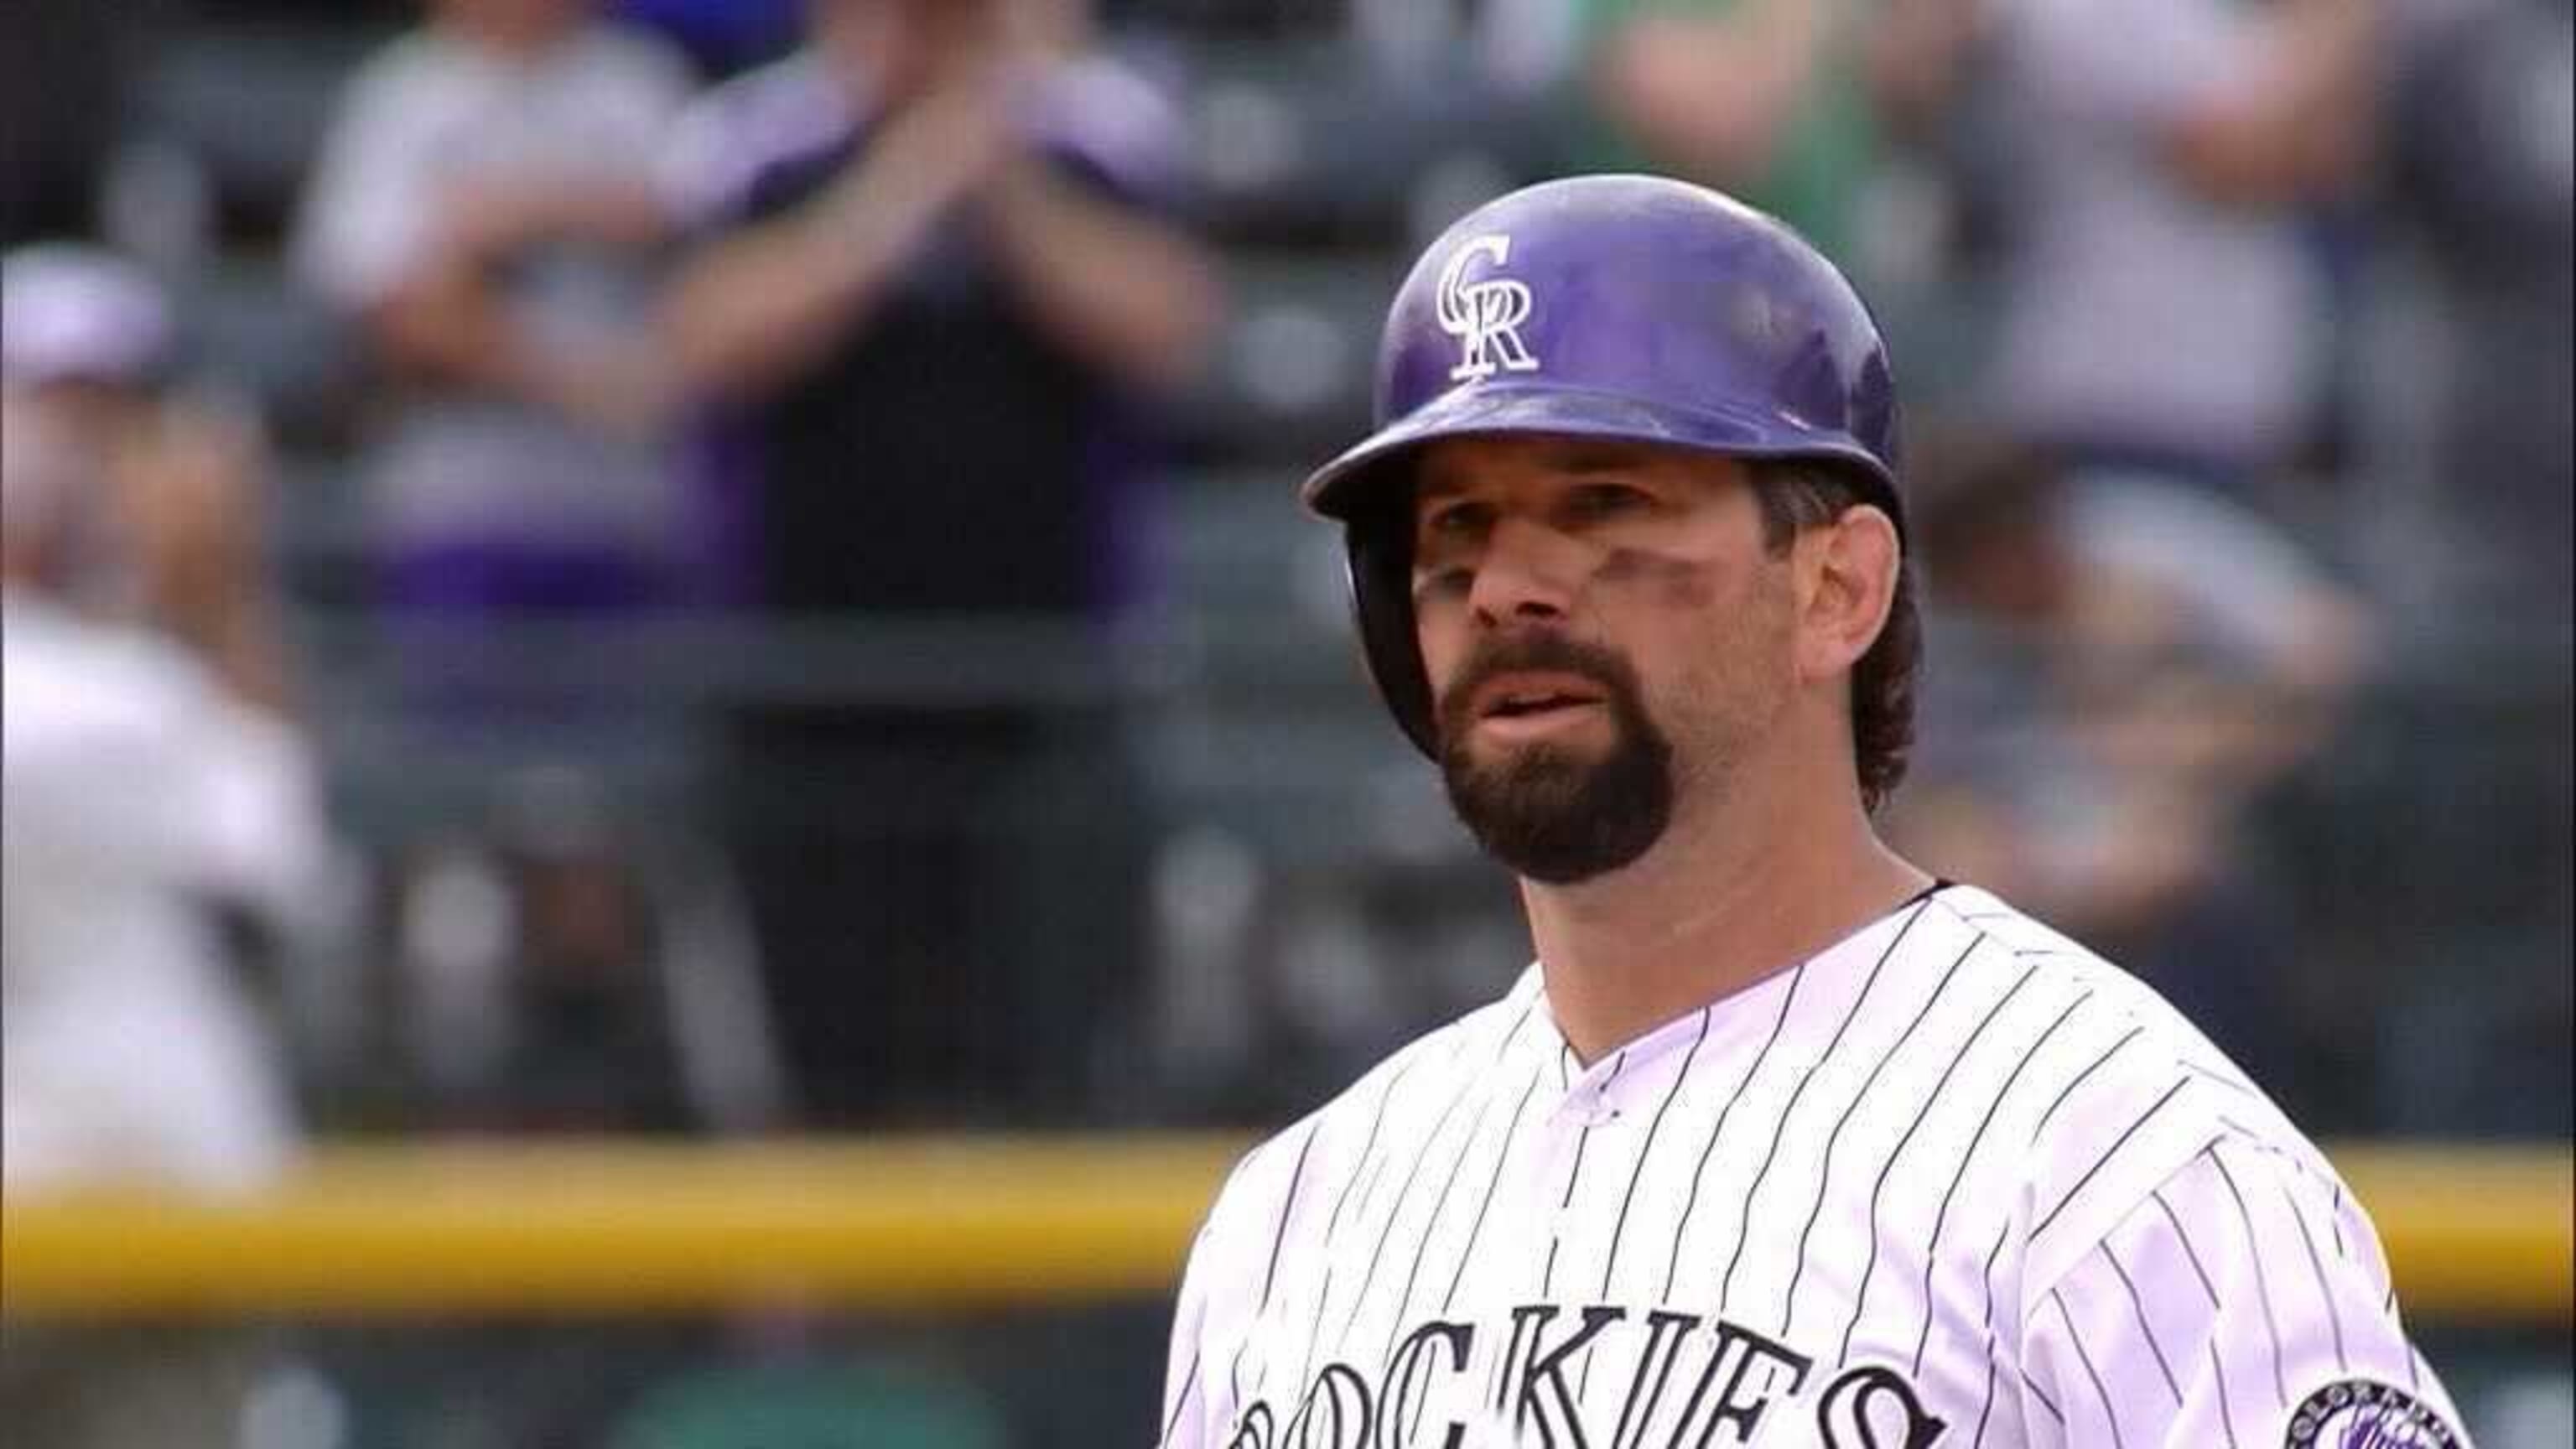 Todd Helton's moment approaches amongst the all-time Colorado Rockies to  appear on Hall of Fame ballot